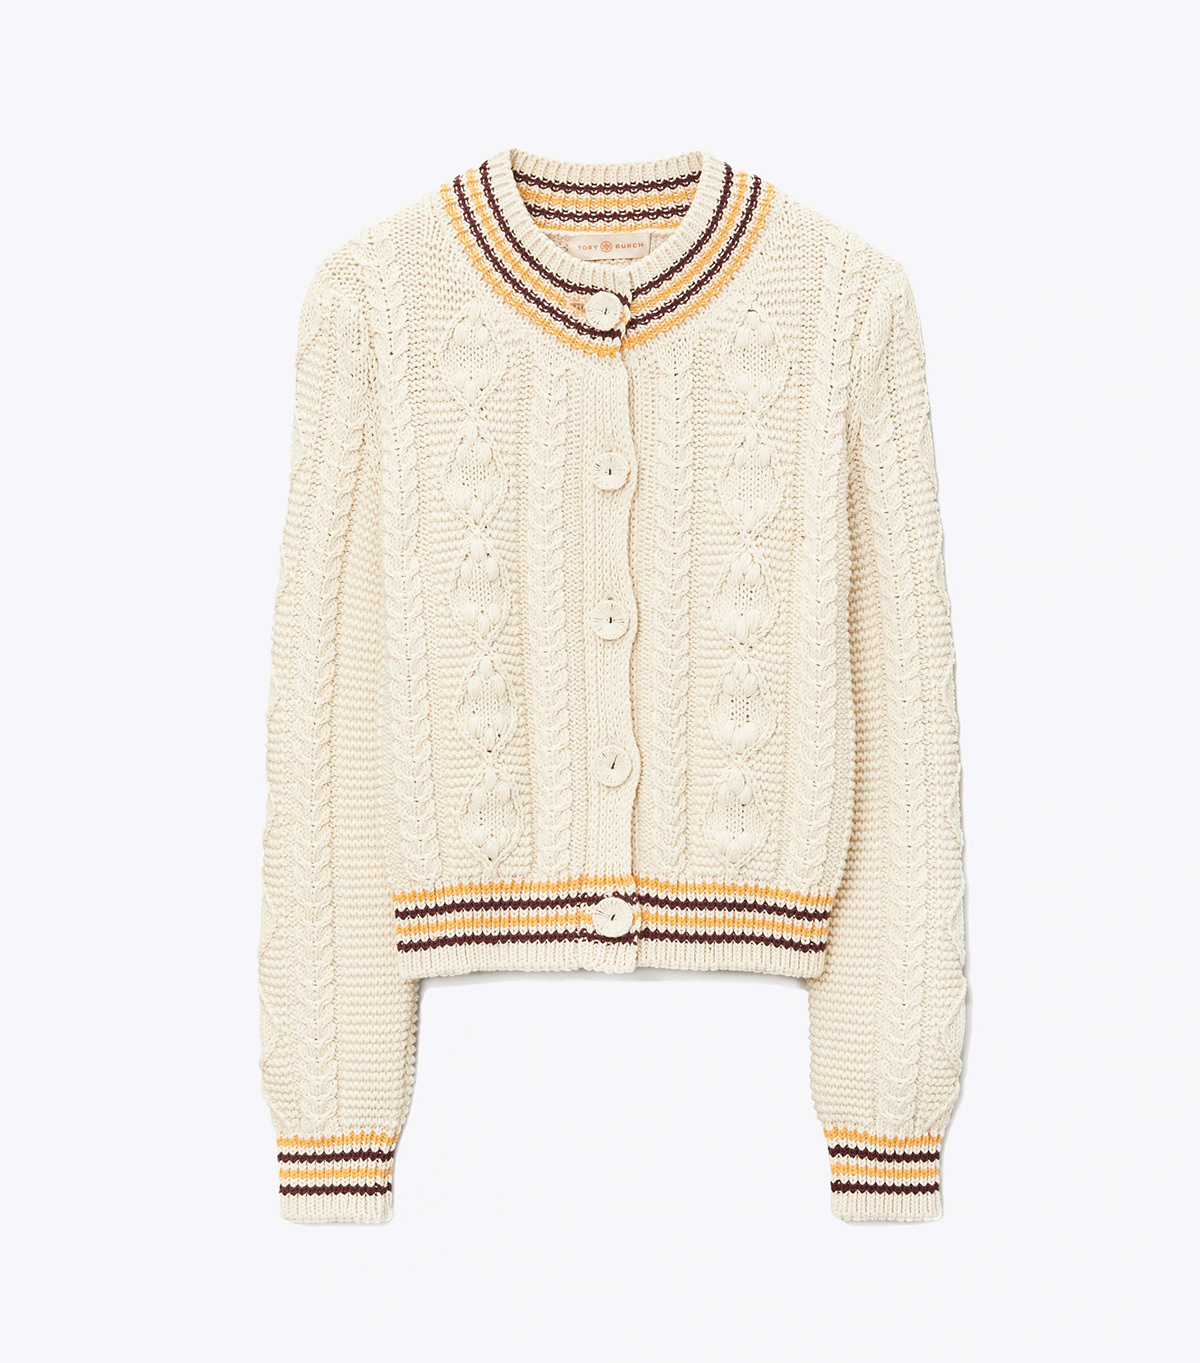 Perfect Pairs: Tory Burch Lee Radziwill Double Bag and Cable Knit Cardigan  - PurseBlog